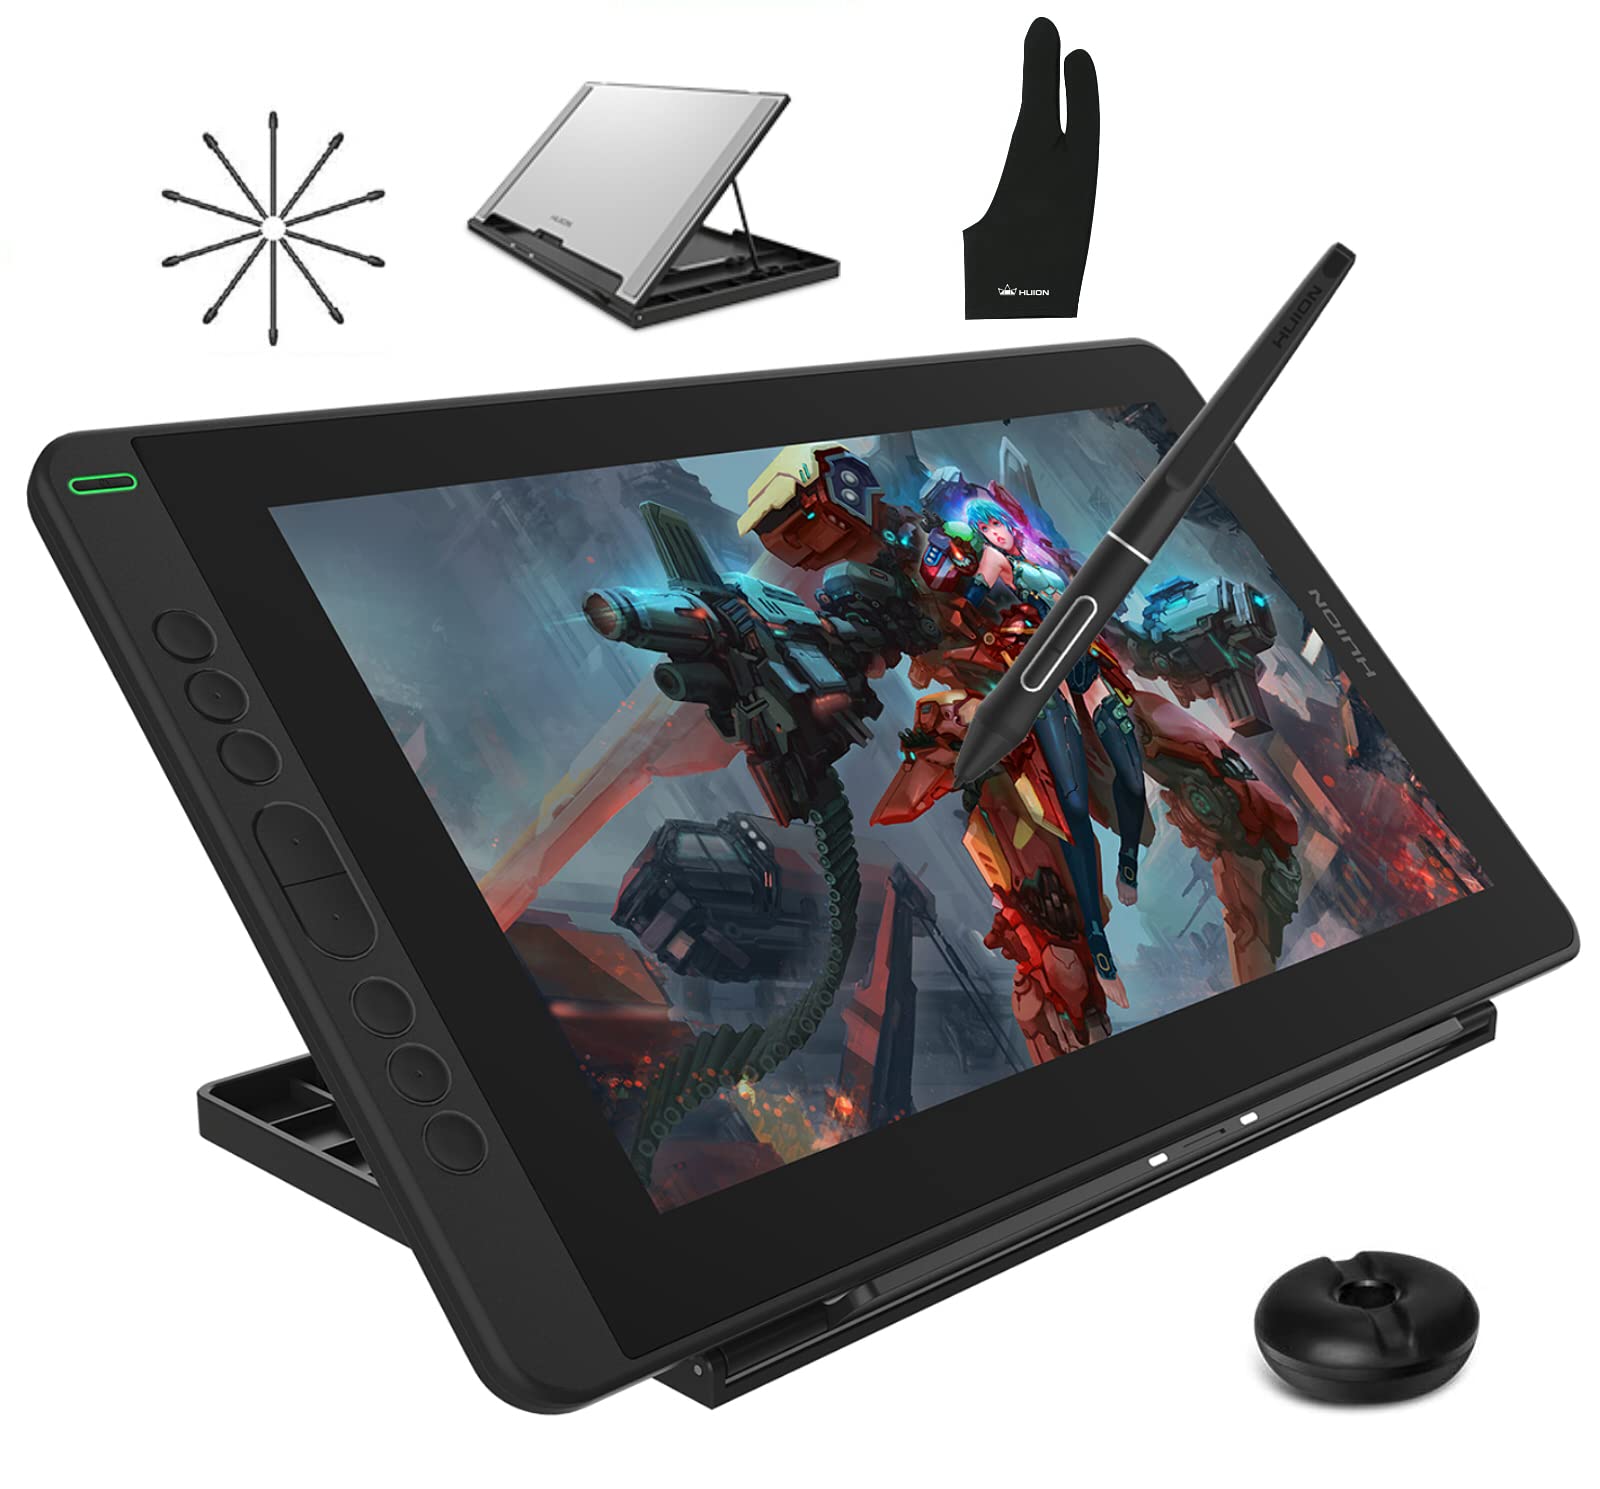 HUION Kamvas 13 Graphics Drawing Tablet with Screen Full Laminated Battery-free Pen 8192 Level Pressure Tilt 8 Hot Keys with Adjustable Stand, 13.3inch Pen Display for Android/Mac/Linux/Windows, Black